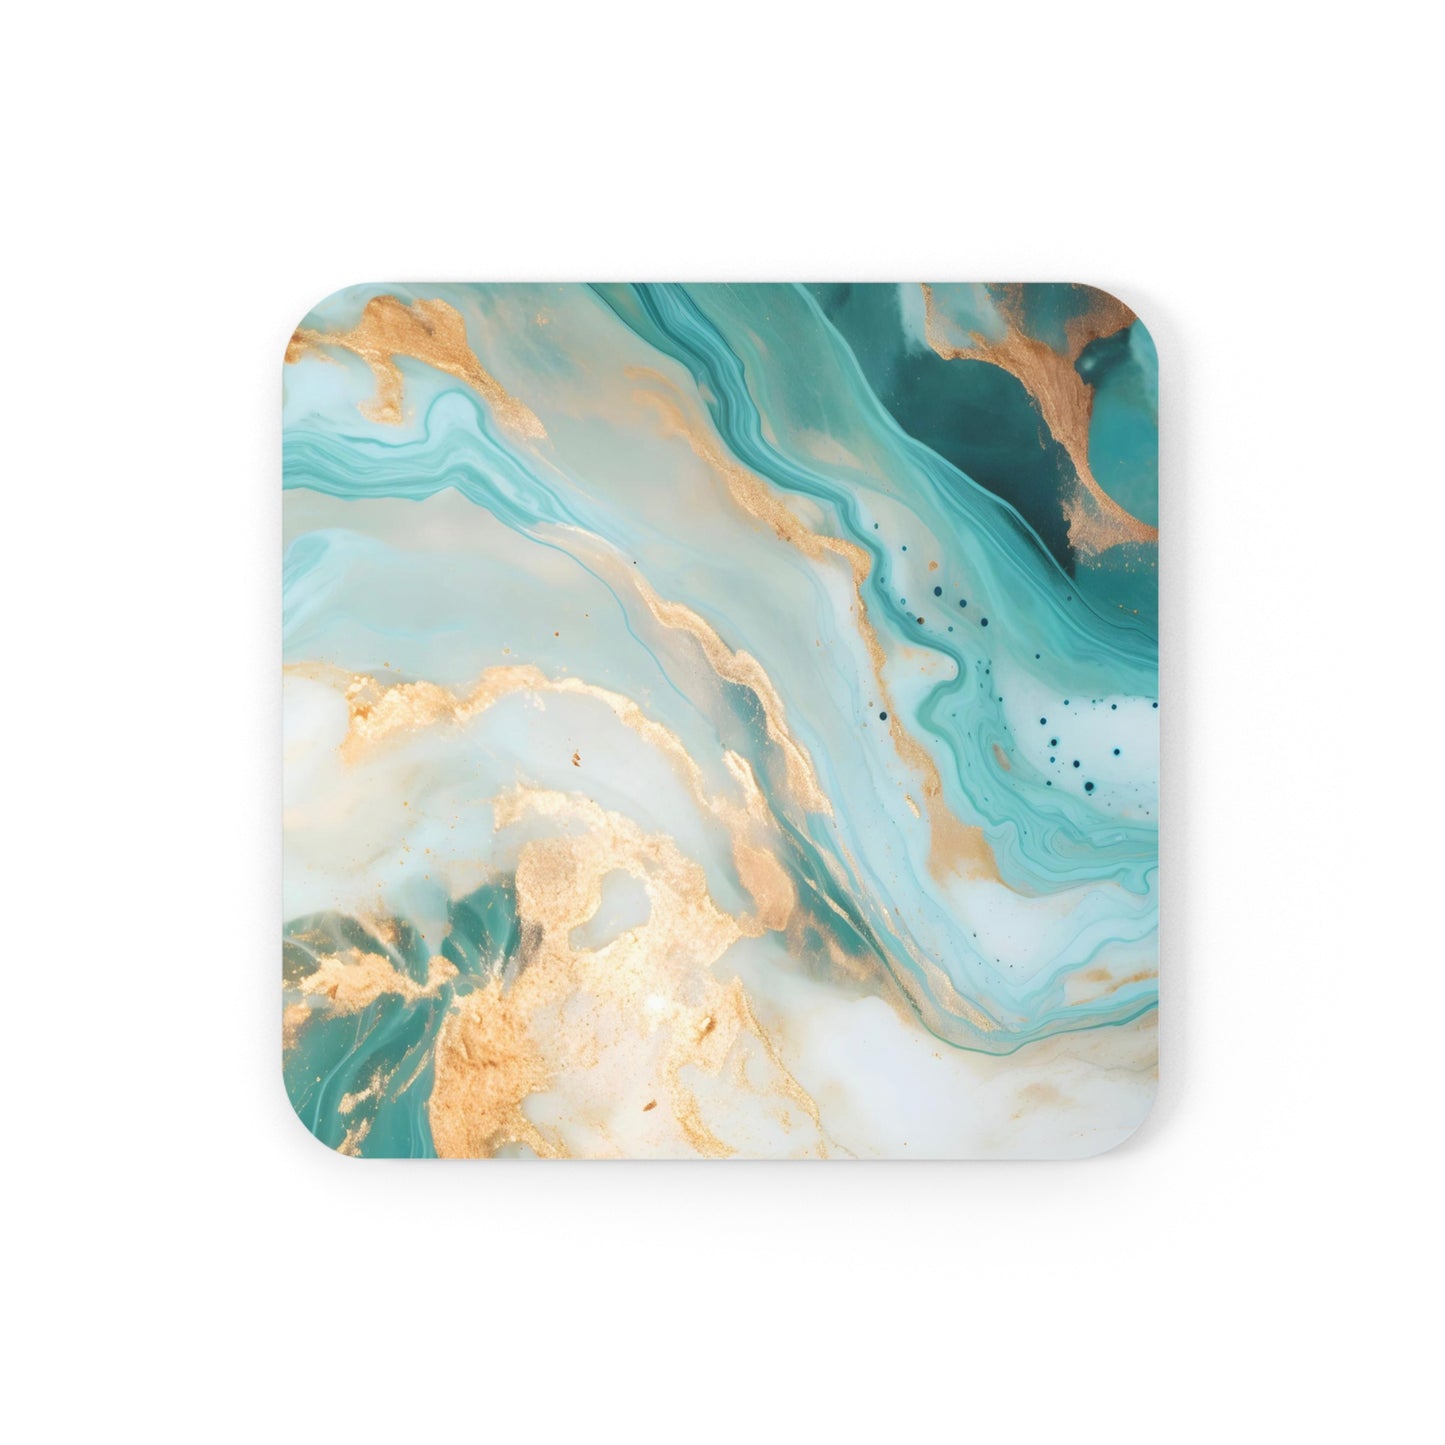 Soft Teal, Turquoise and Ivory Geode | Set of 4 Coasters